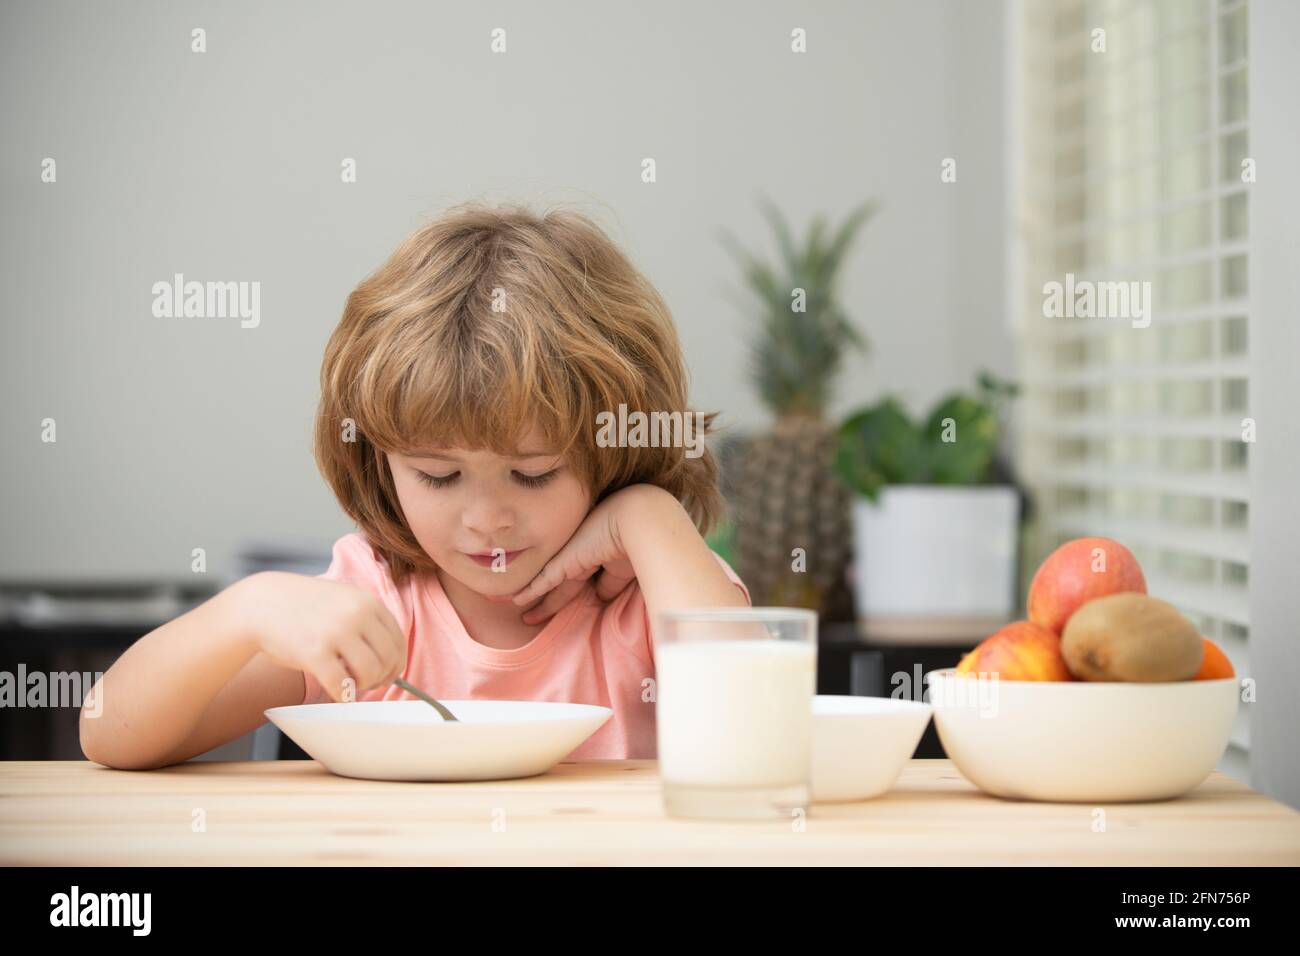 Food and drink for kids. Caucasian toddler child boy eating healthy soup in the kitchen. Stock Photo